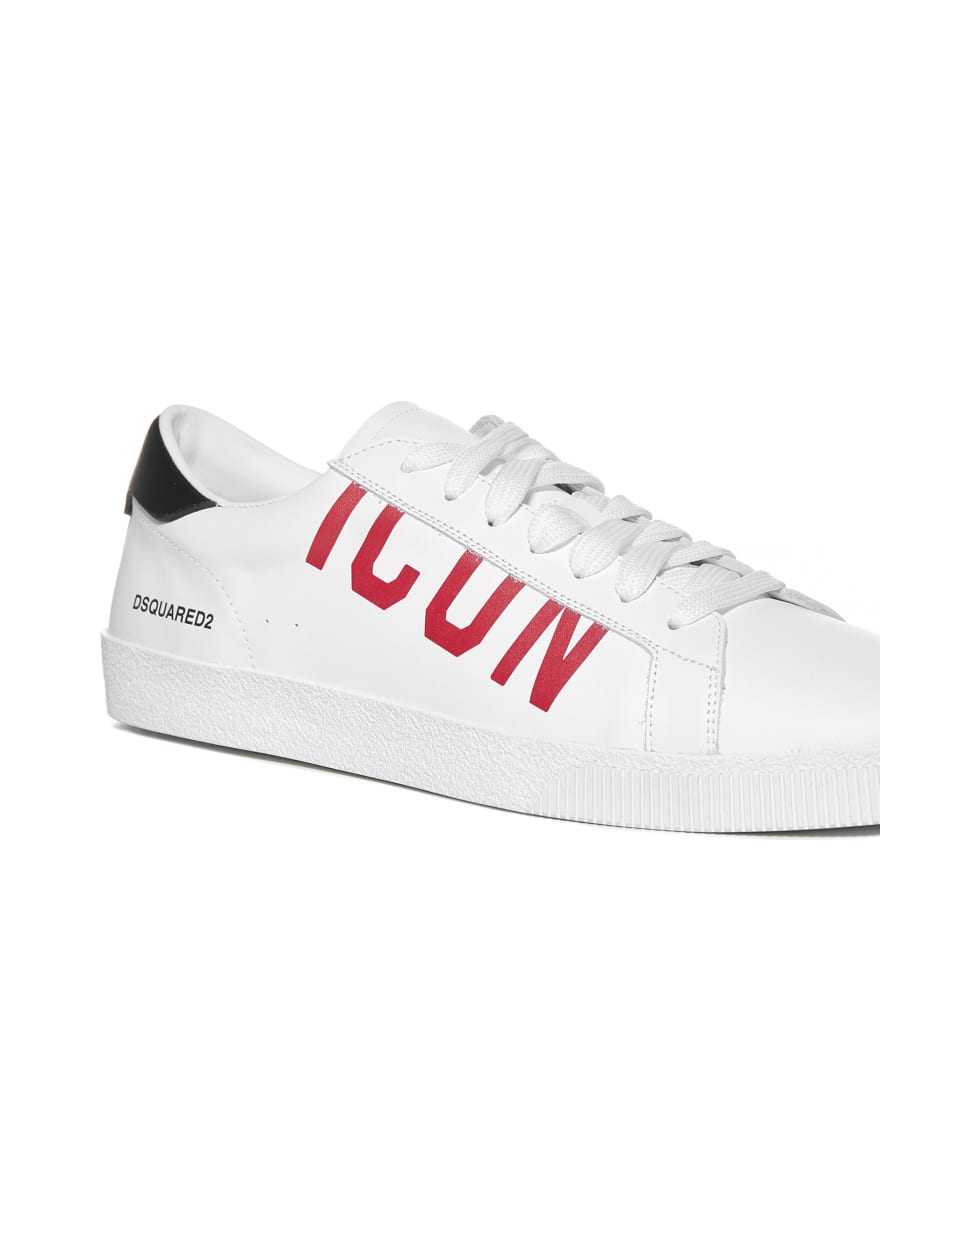 Dsquared2 Sneakers - White red black